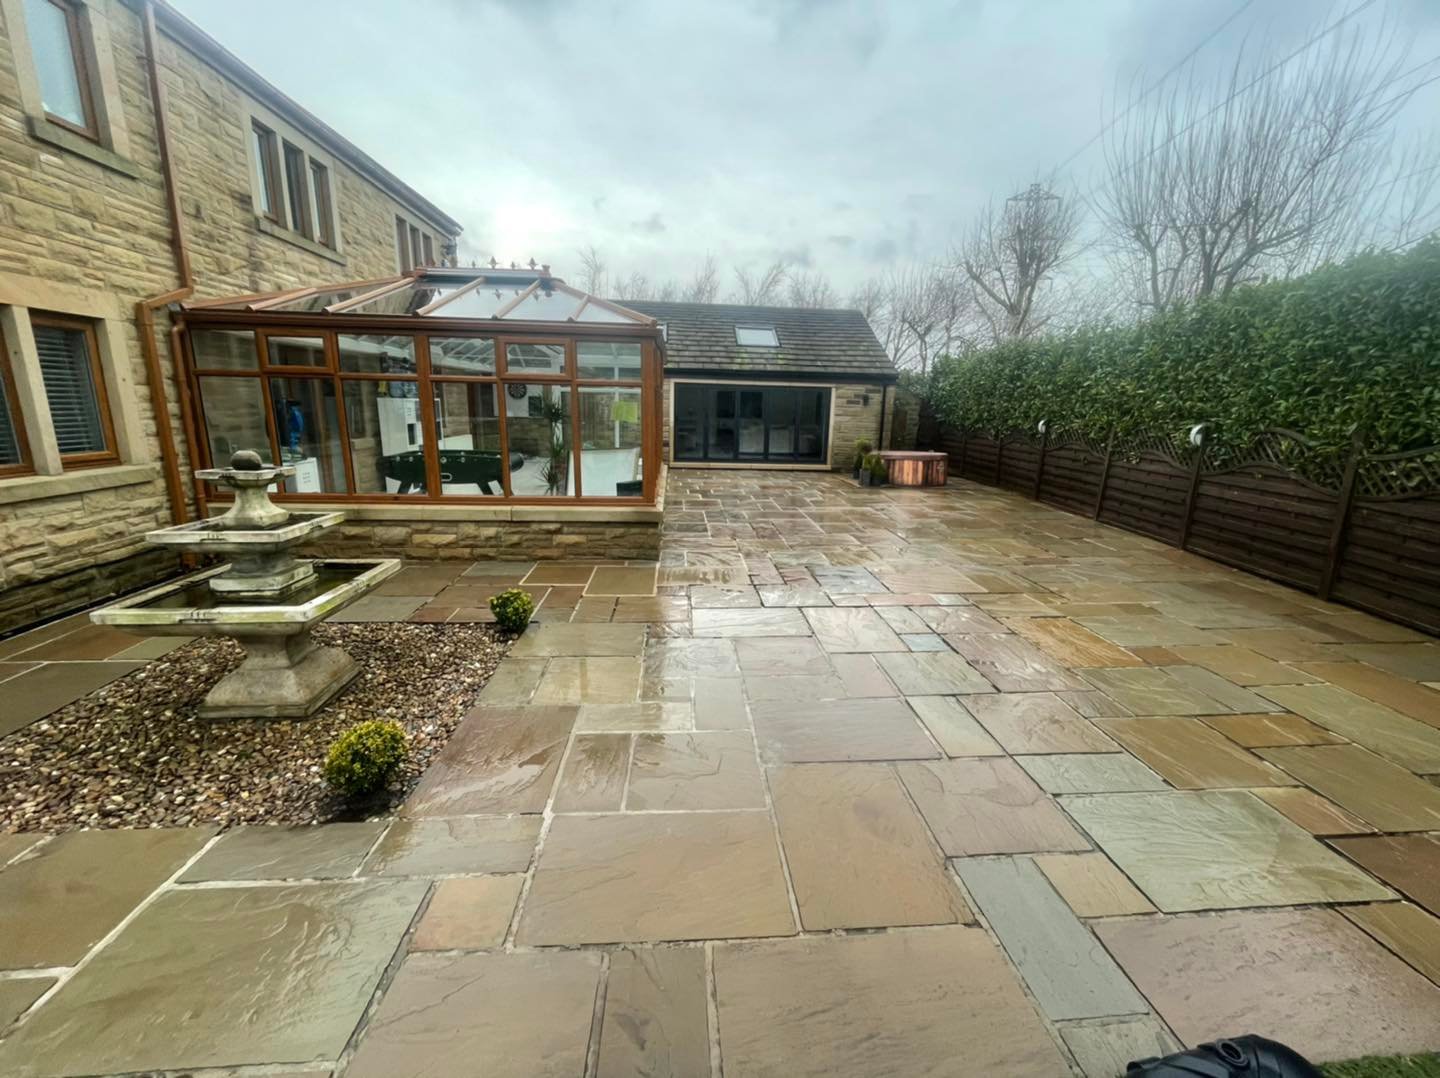 Patio Stone Cleaning